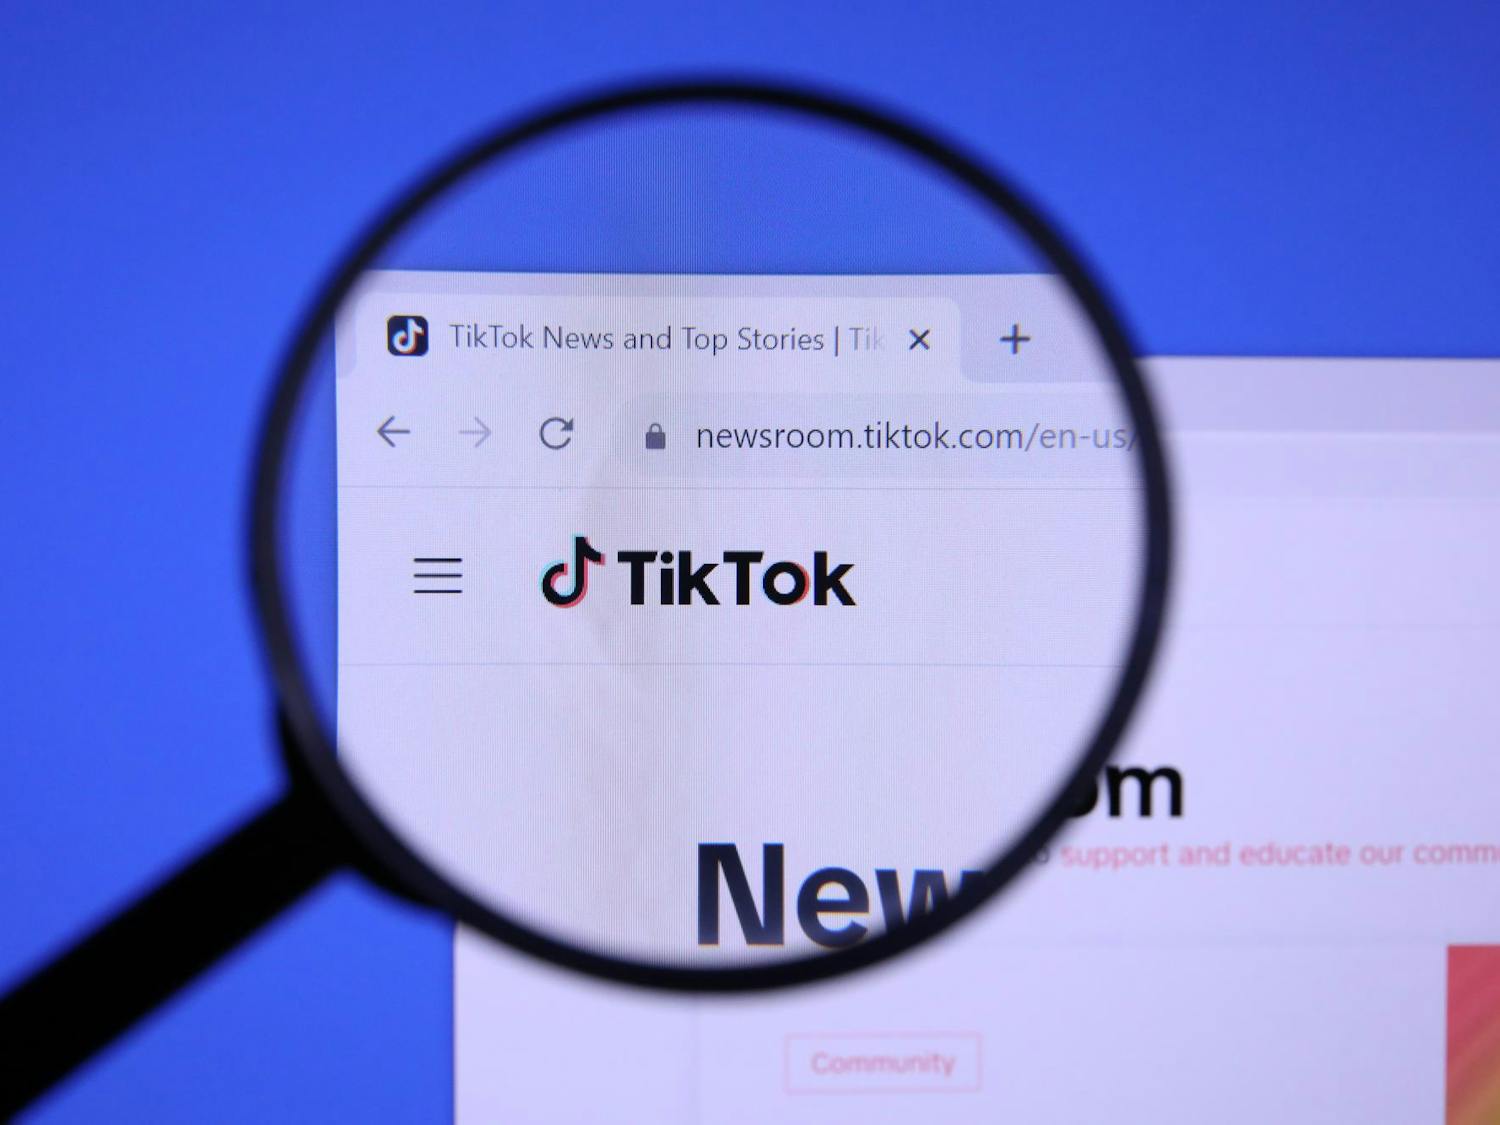 Homepage of TIKTOK Website magnified on logo with magnifying glass